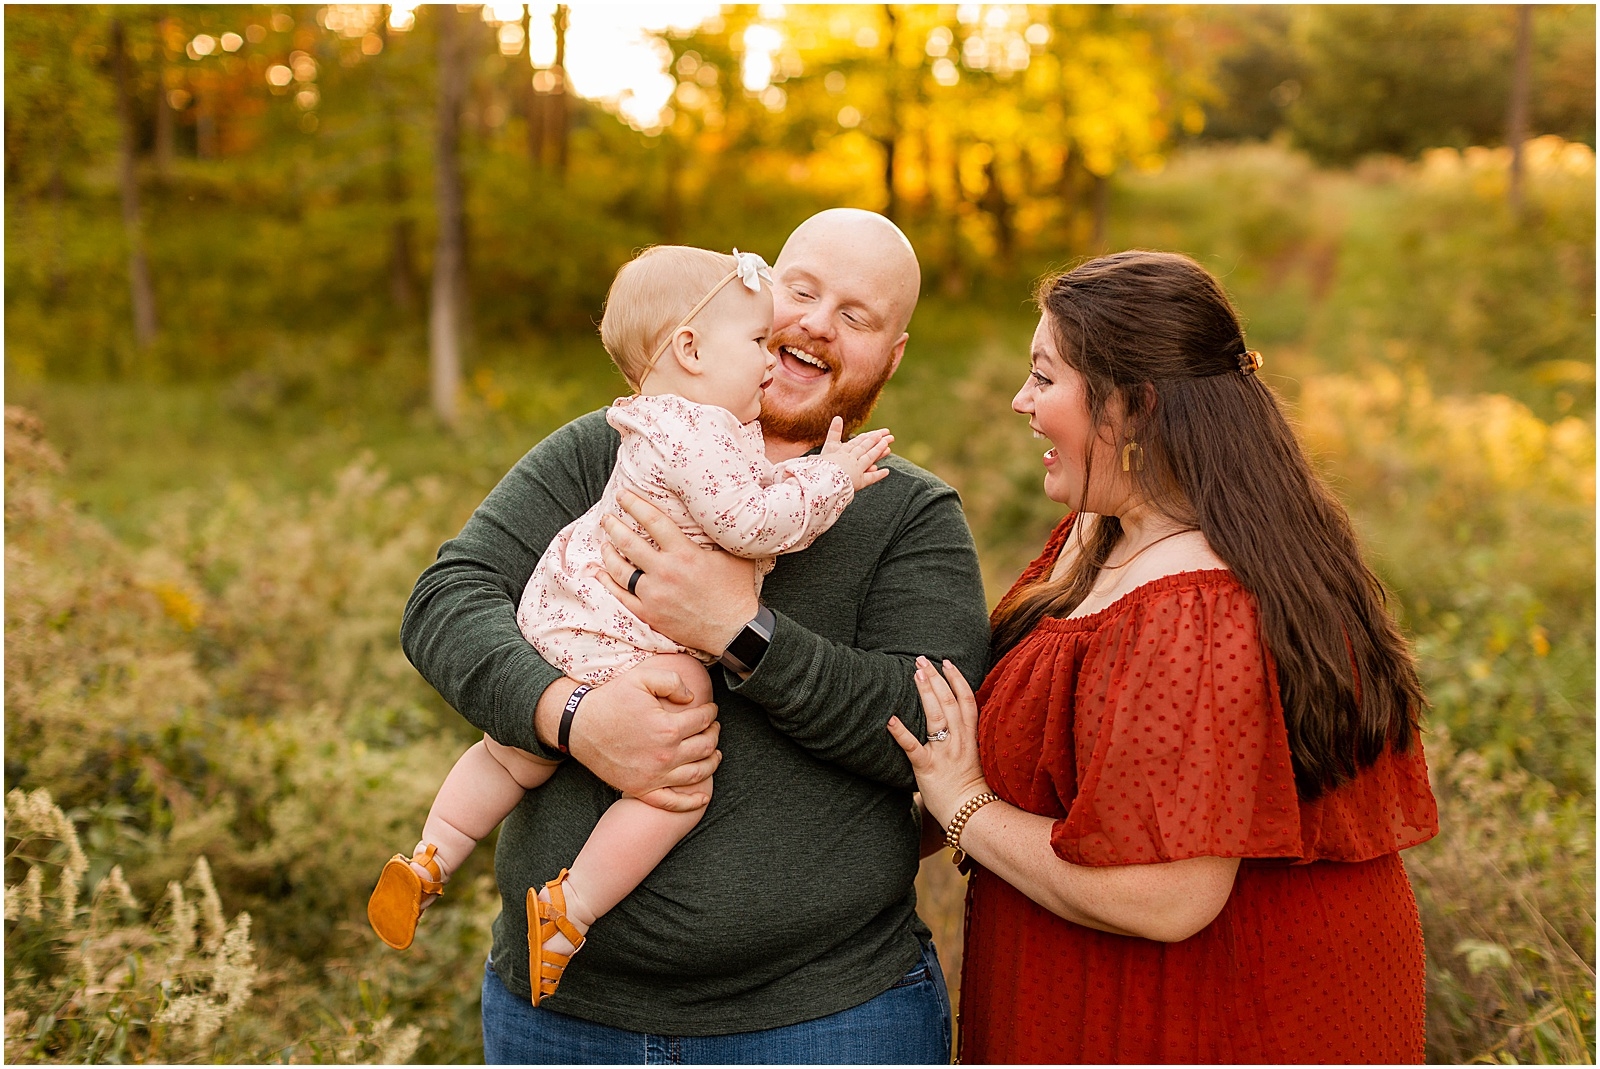 The Peck's Fall Family Session Bret and Brandie Photography | Evansville Indiana Wedding Photographers_0010.jpg